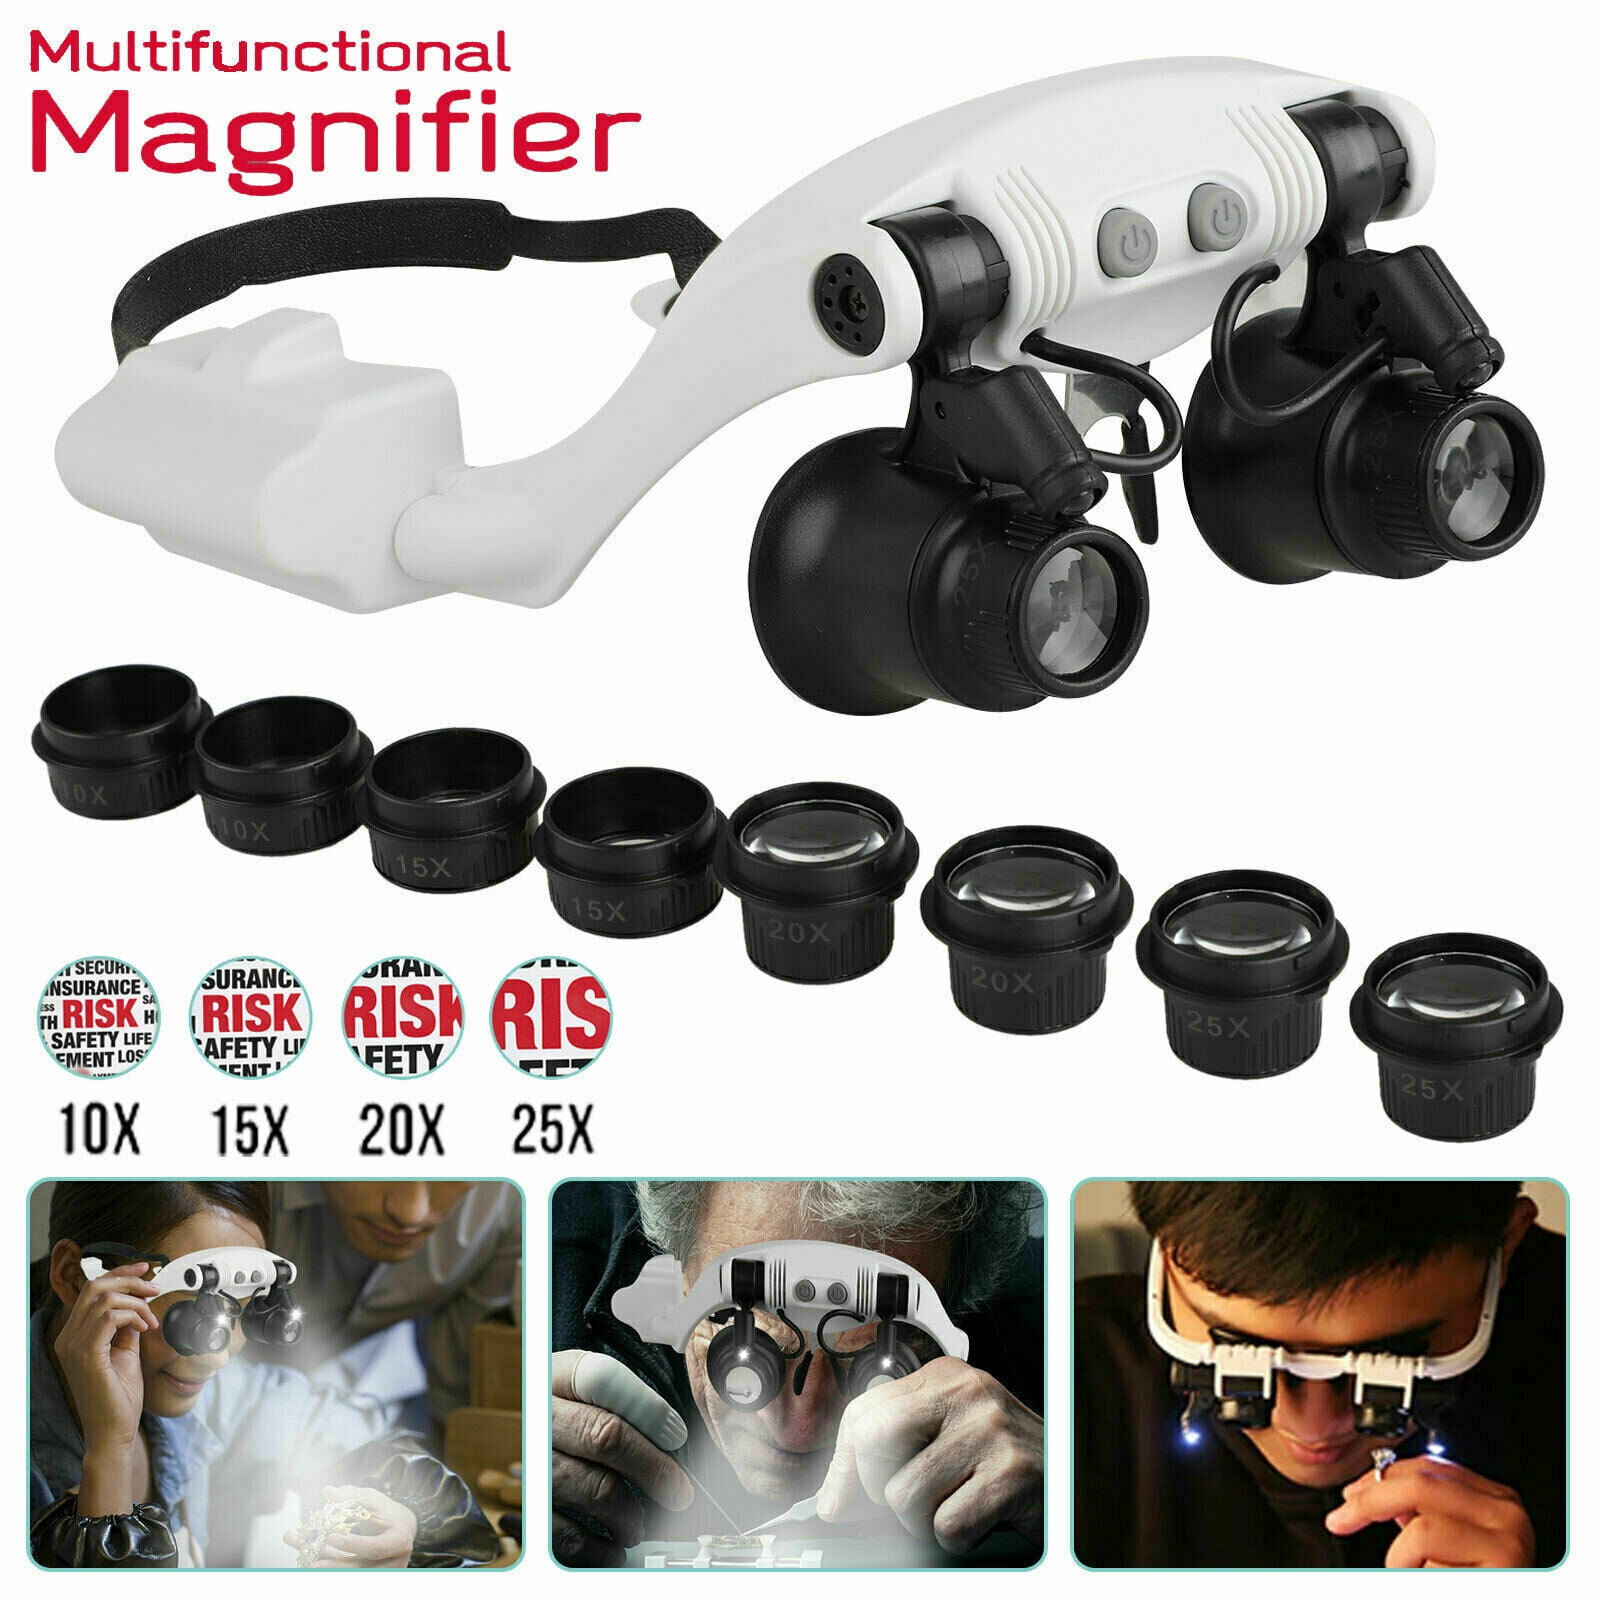 10X Illuminated Magnifying Glasses with 9LED Light Reading Magnifier Loupe  Glass Jewelry Inspection Insect Bug Viewer Box Tool